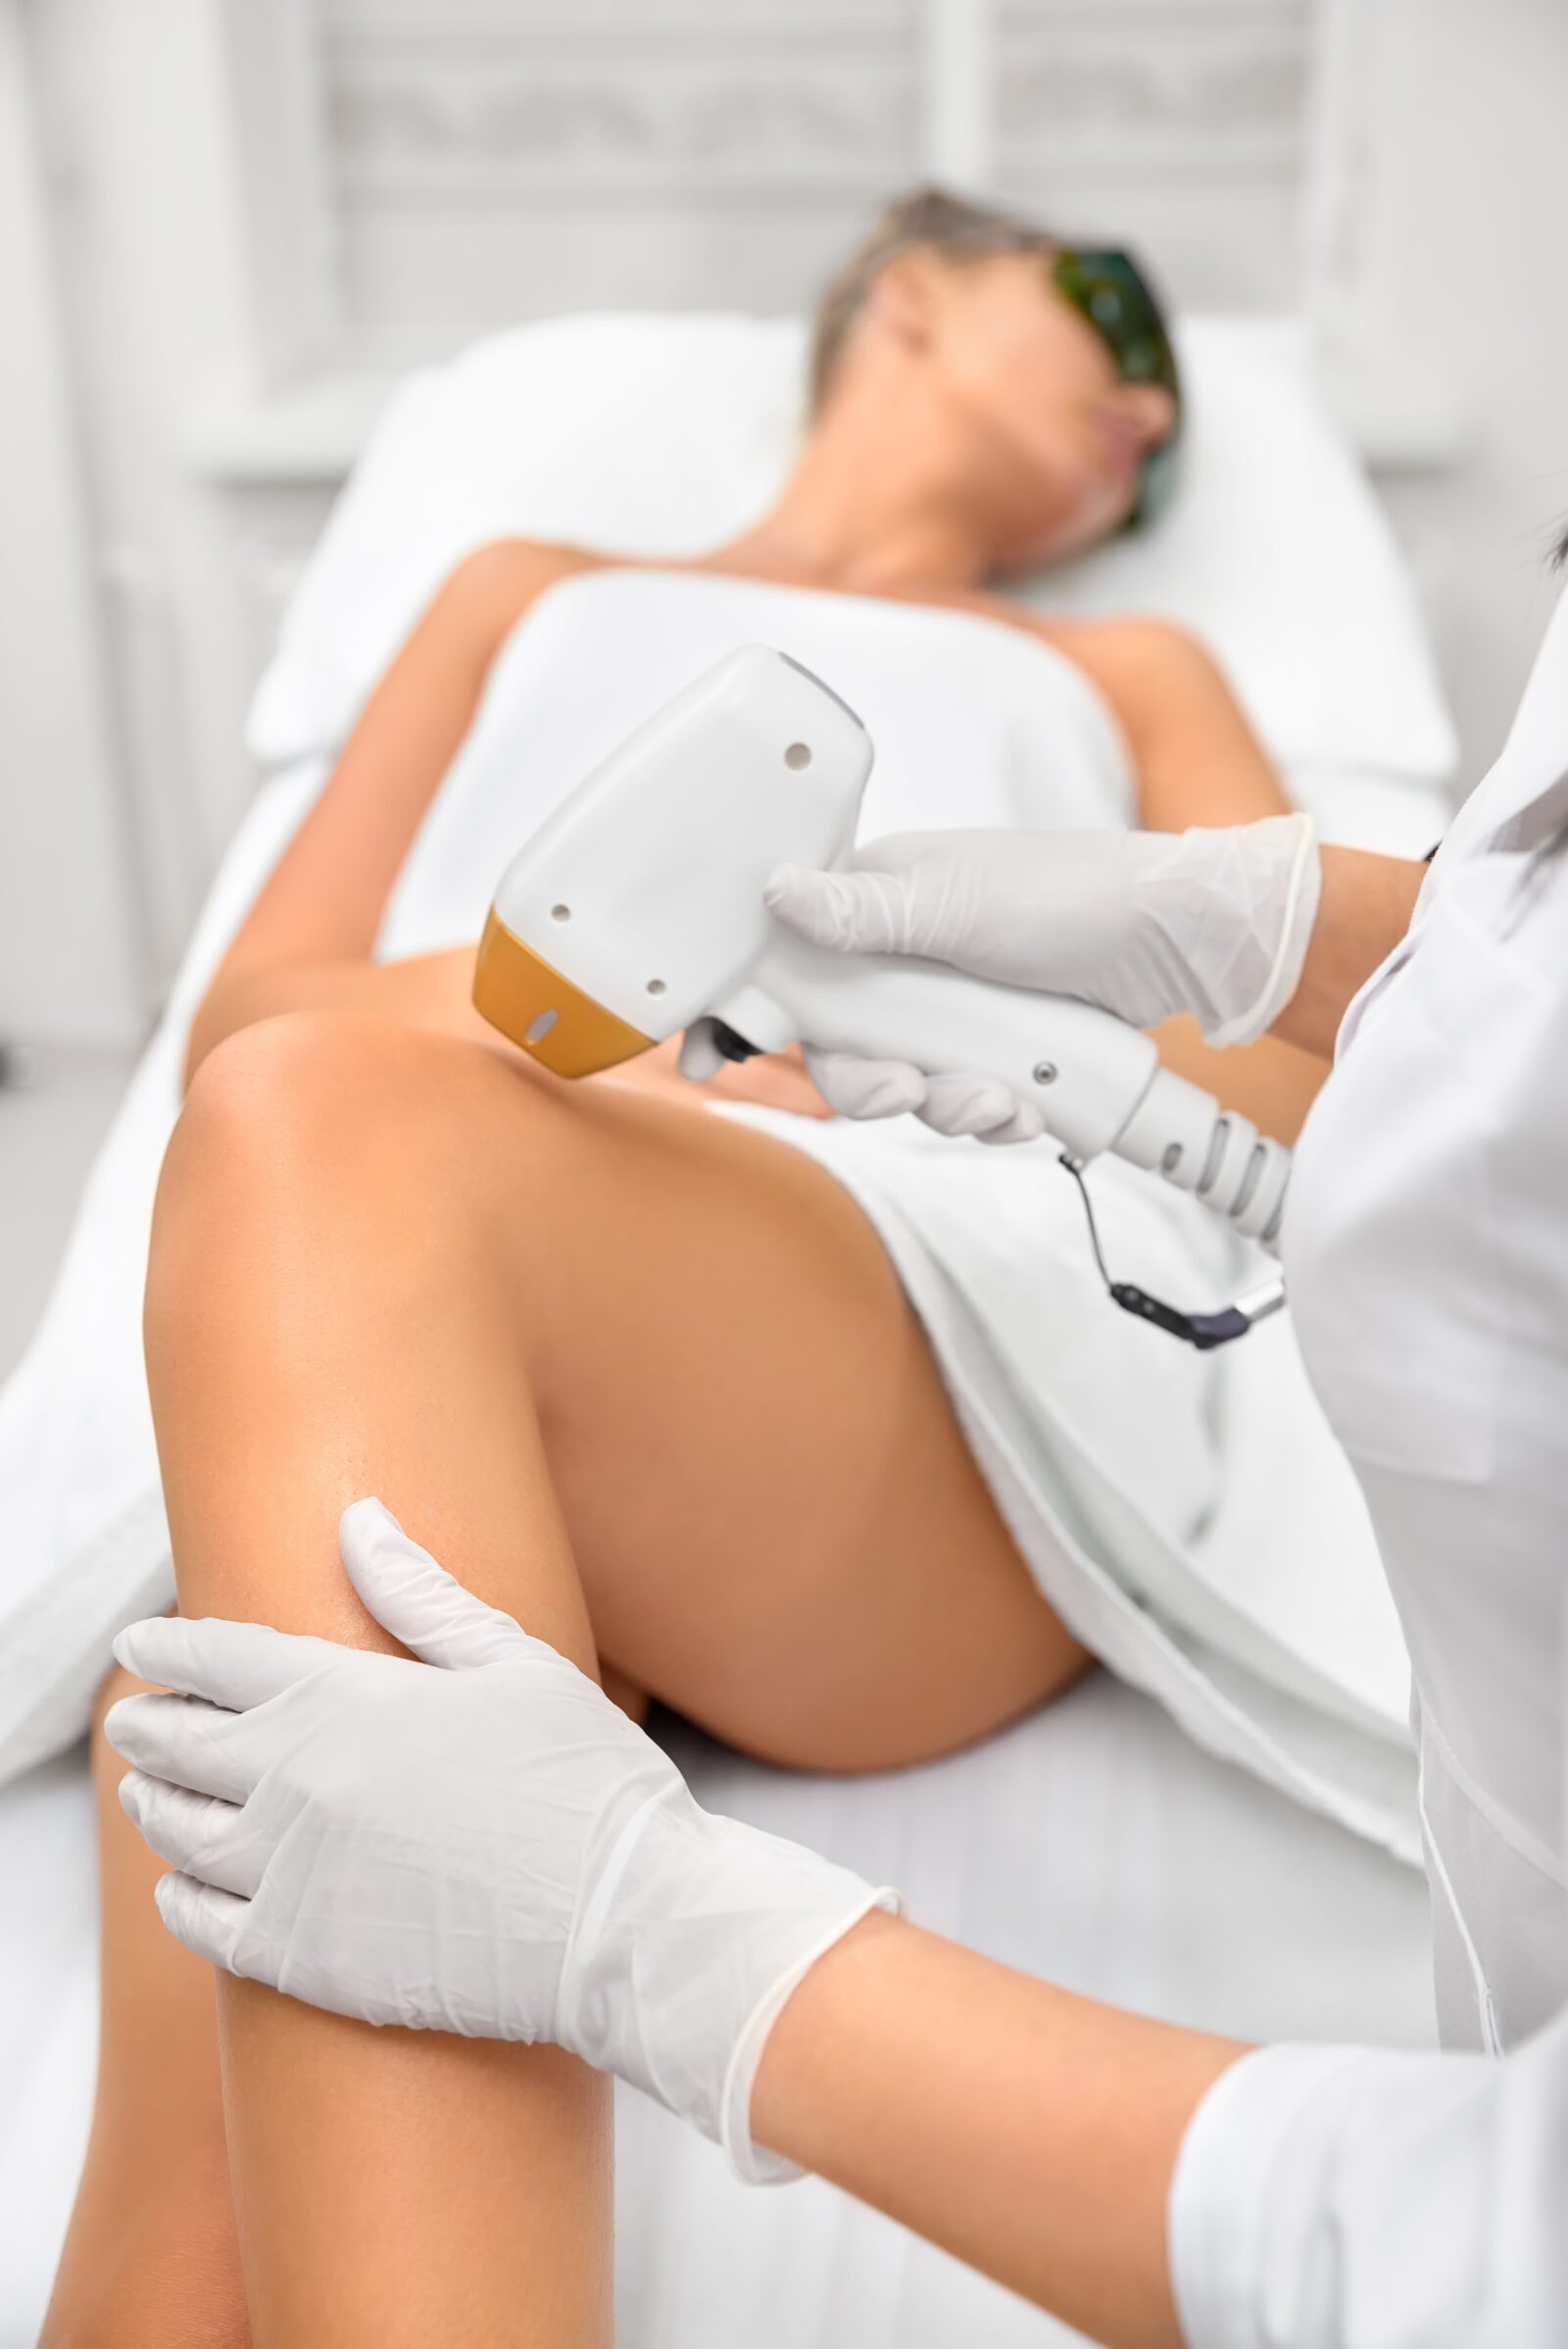 woman laying on spa table having laser hair removal performed on her legs